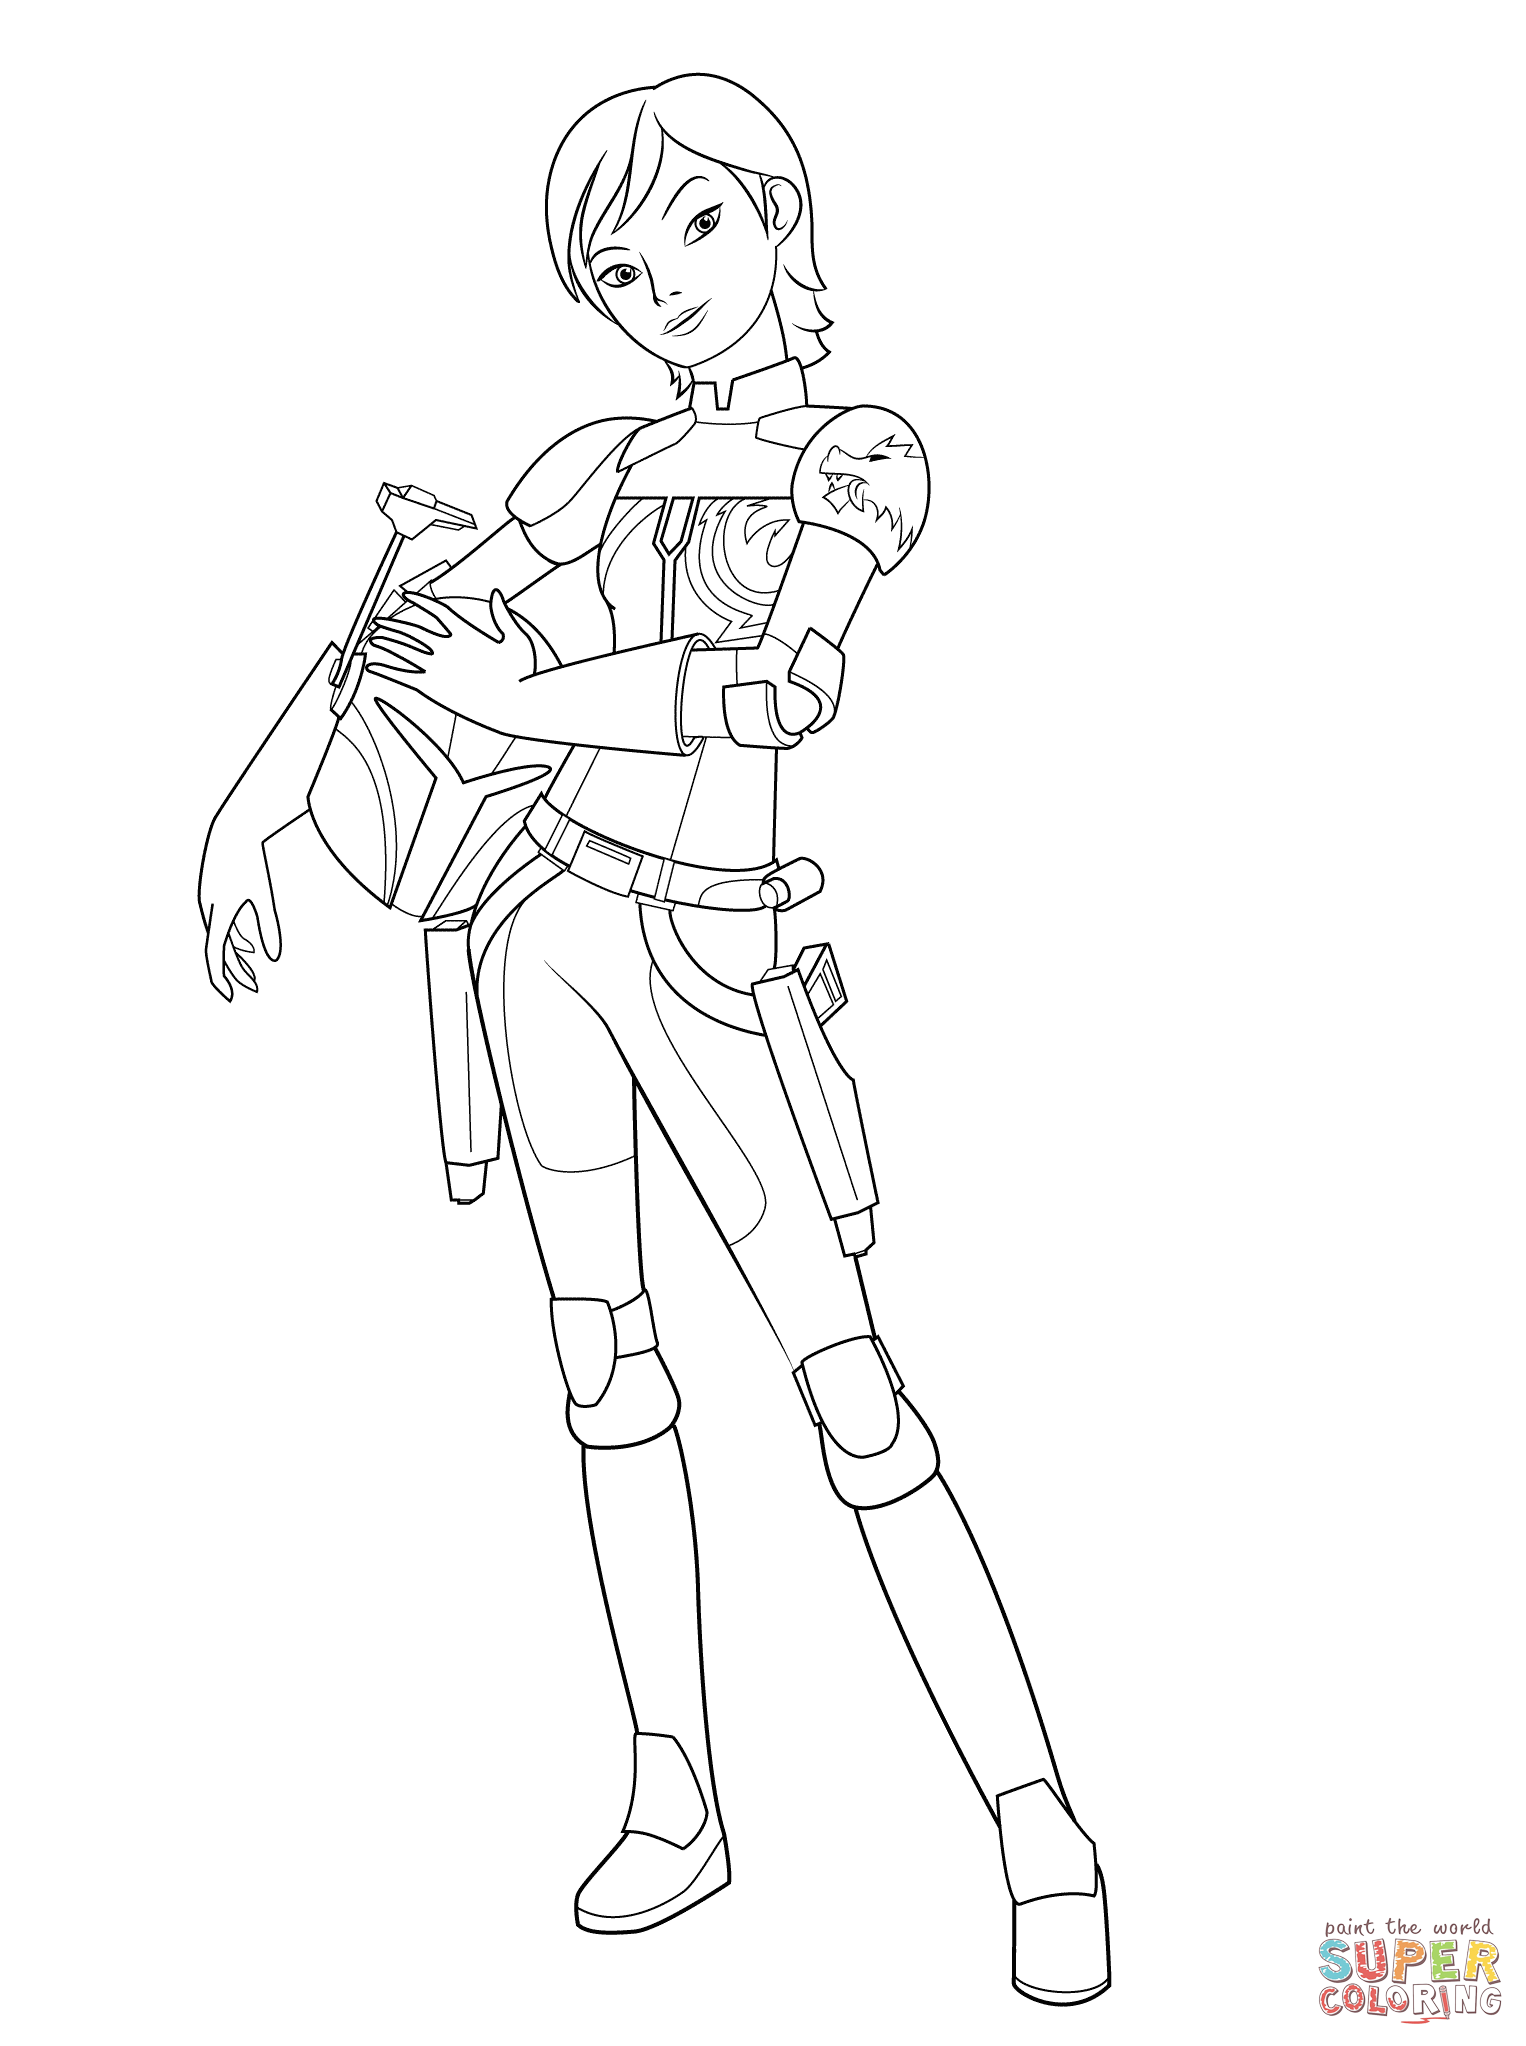 Star Wars Rebels coloring pages | Free Coloring Pages